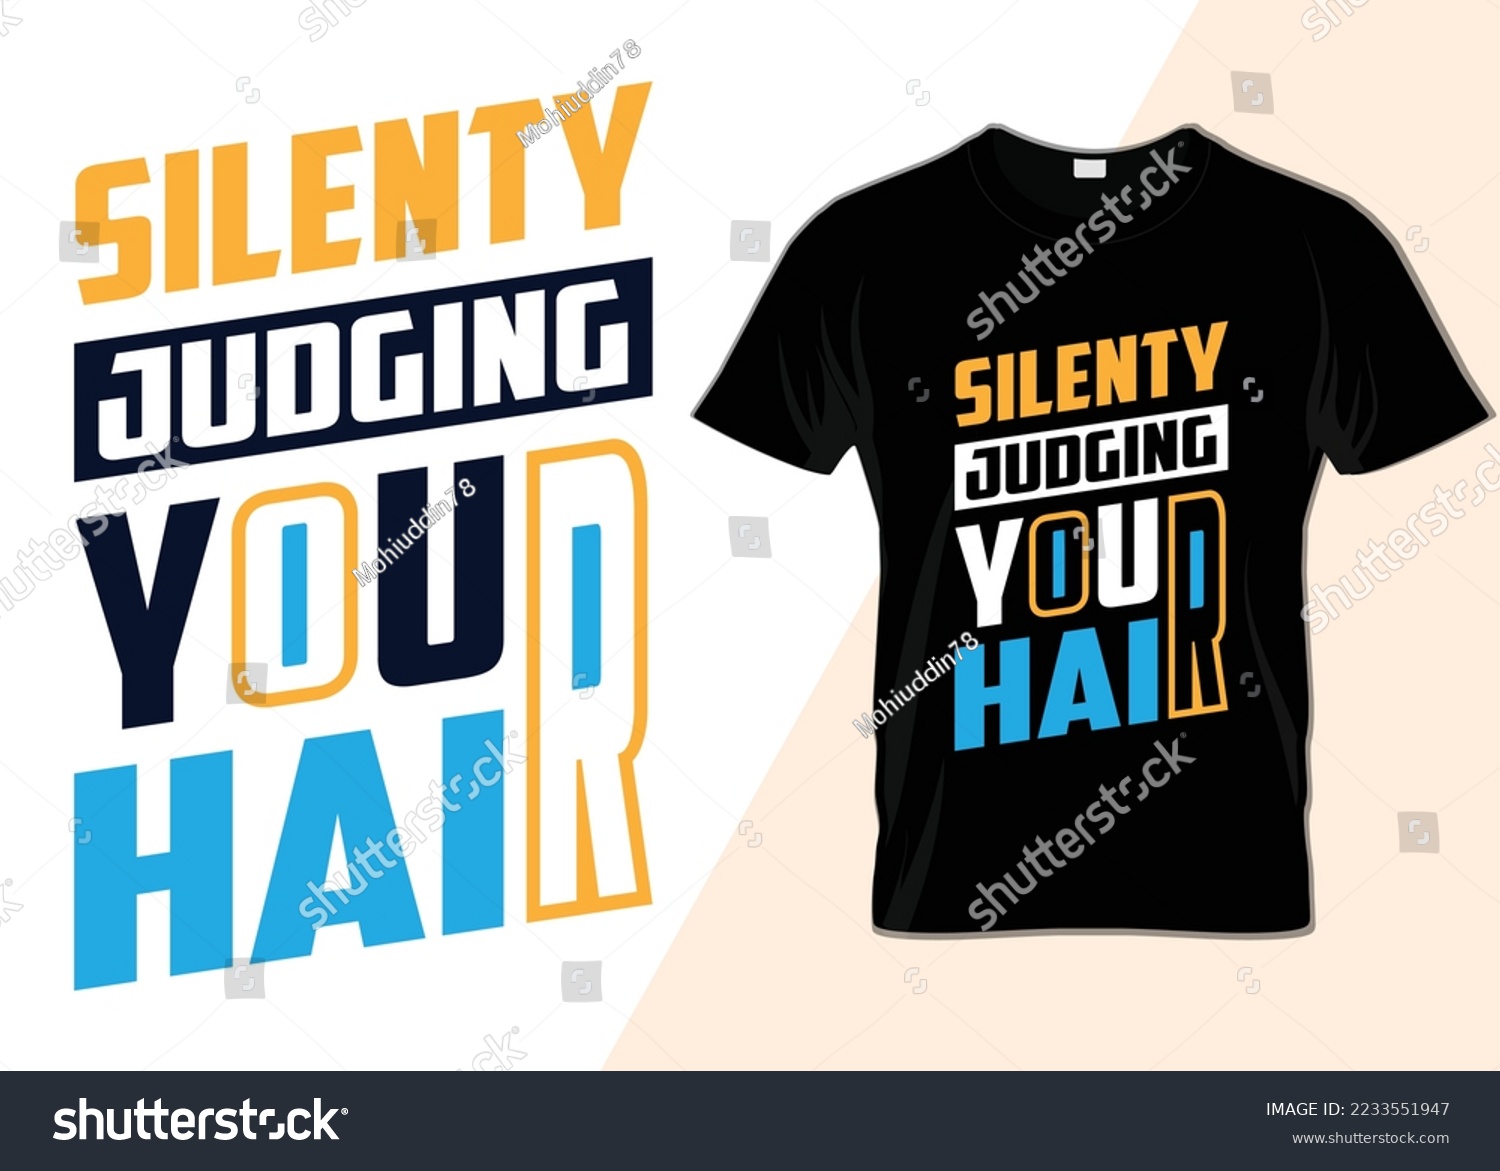 SVG of Silently judging your hair T-shirt design svg